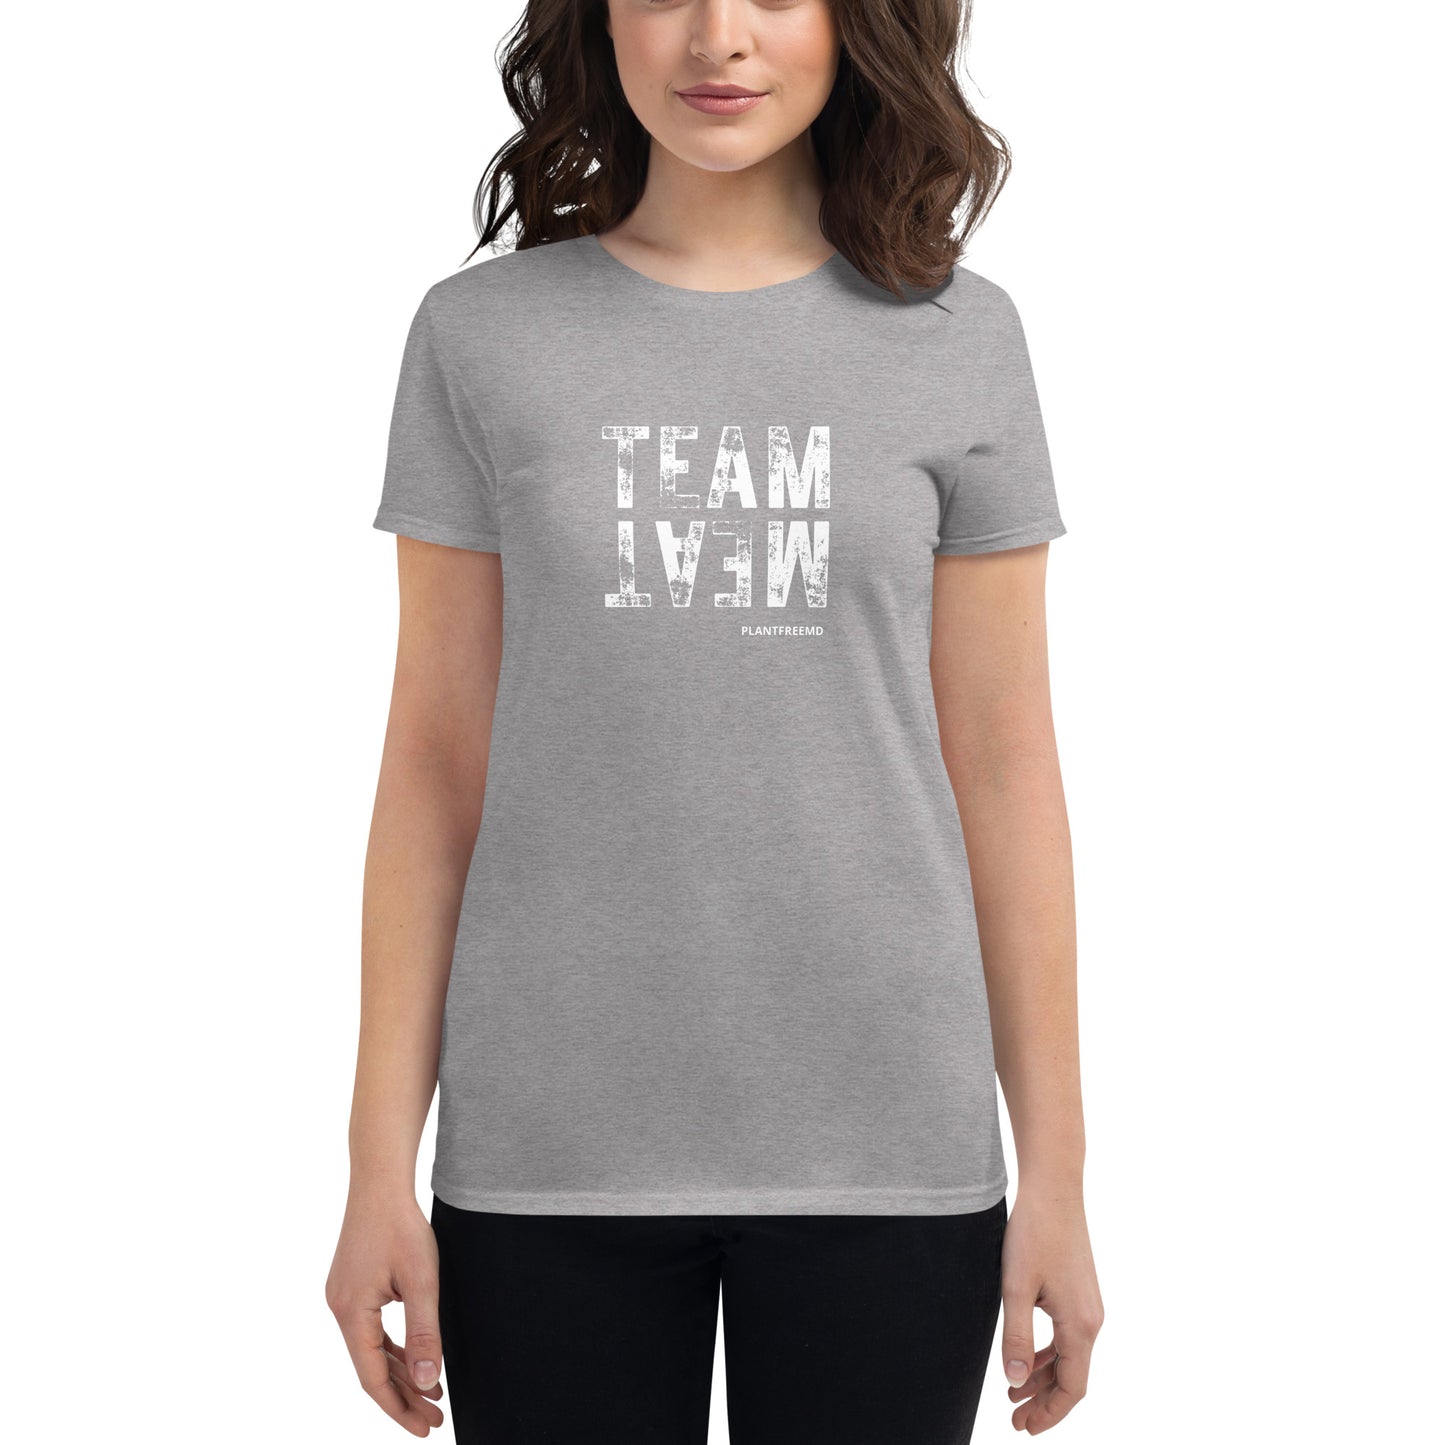 Team Meat Women's Fitted T-shirt